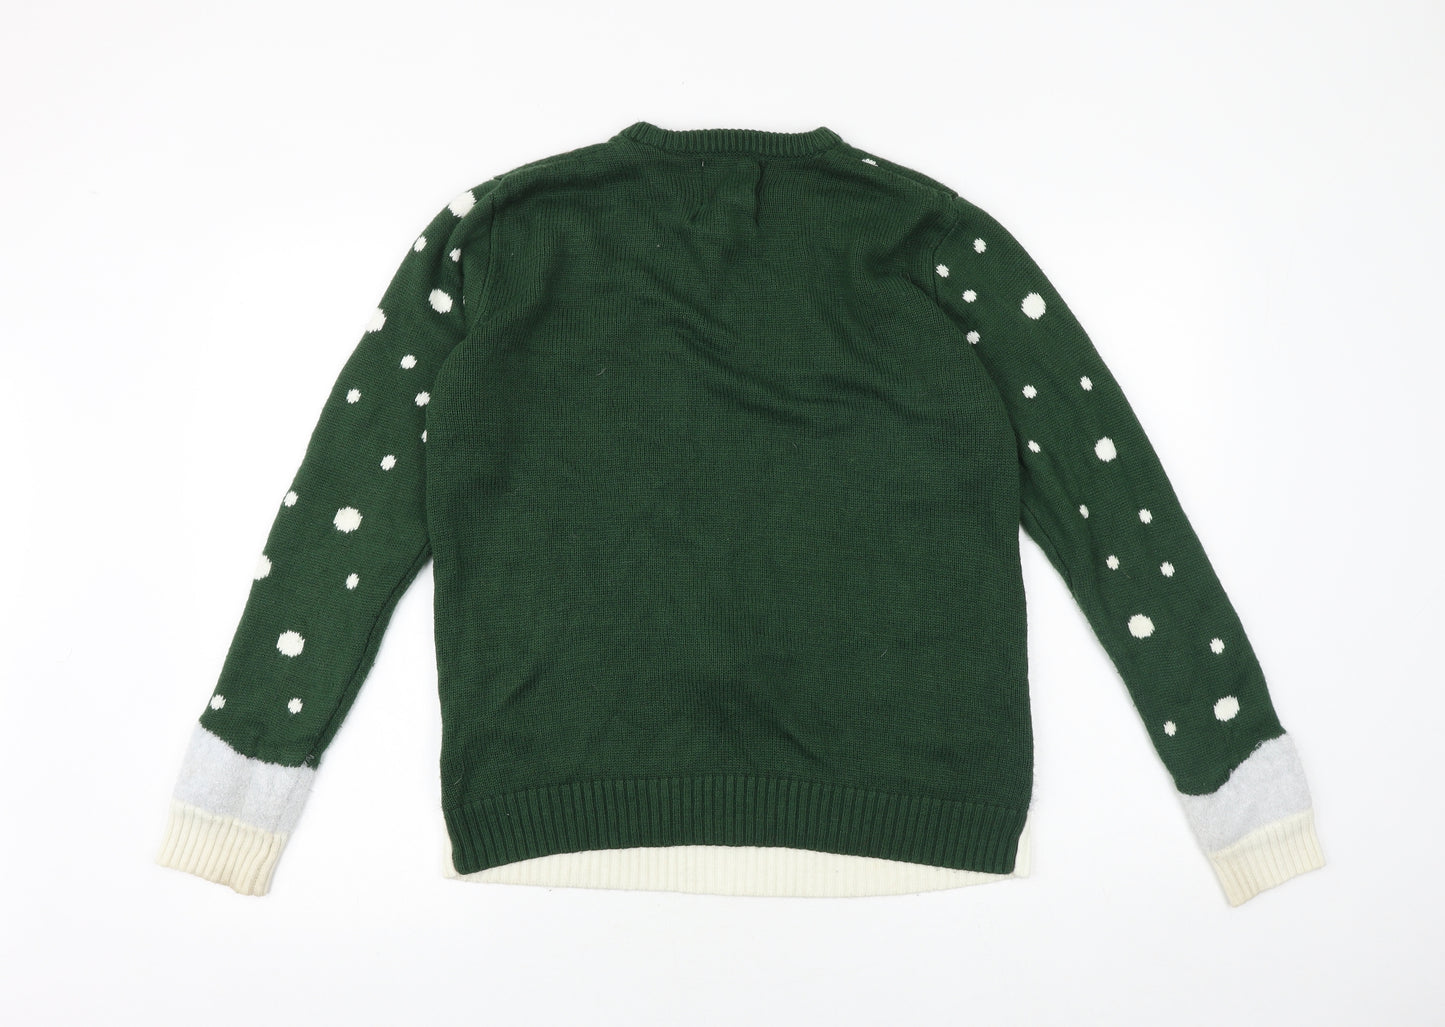 Primark Mens Green Round Neck Geometric Acrylic Pullover Jumper Size M Long Sleeve - Christmas Rudolph